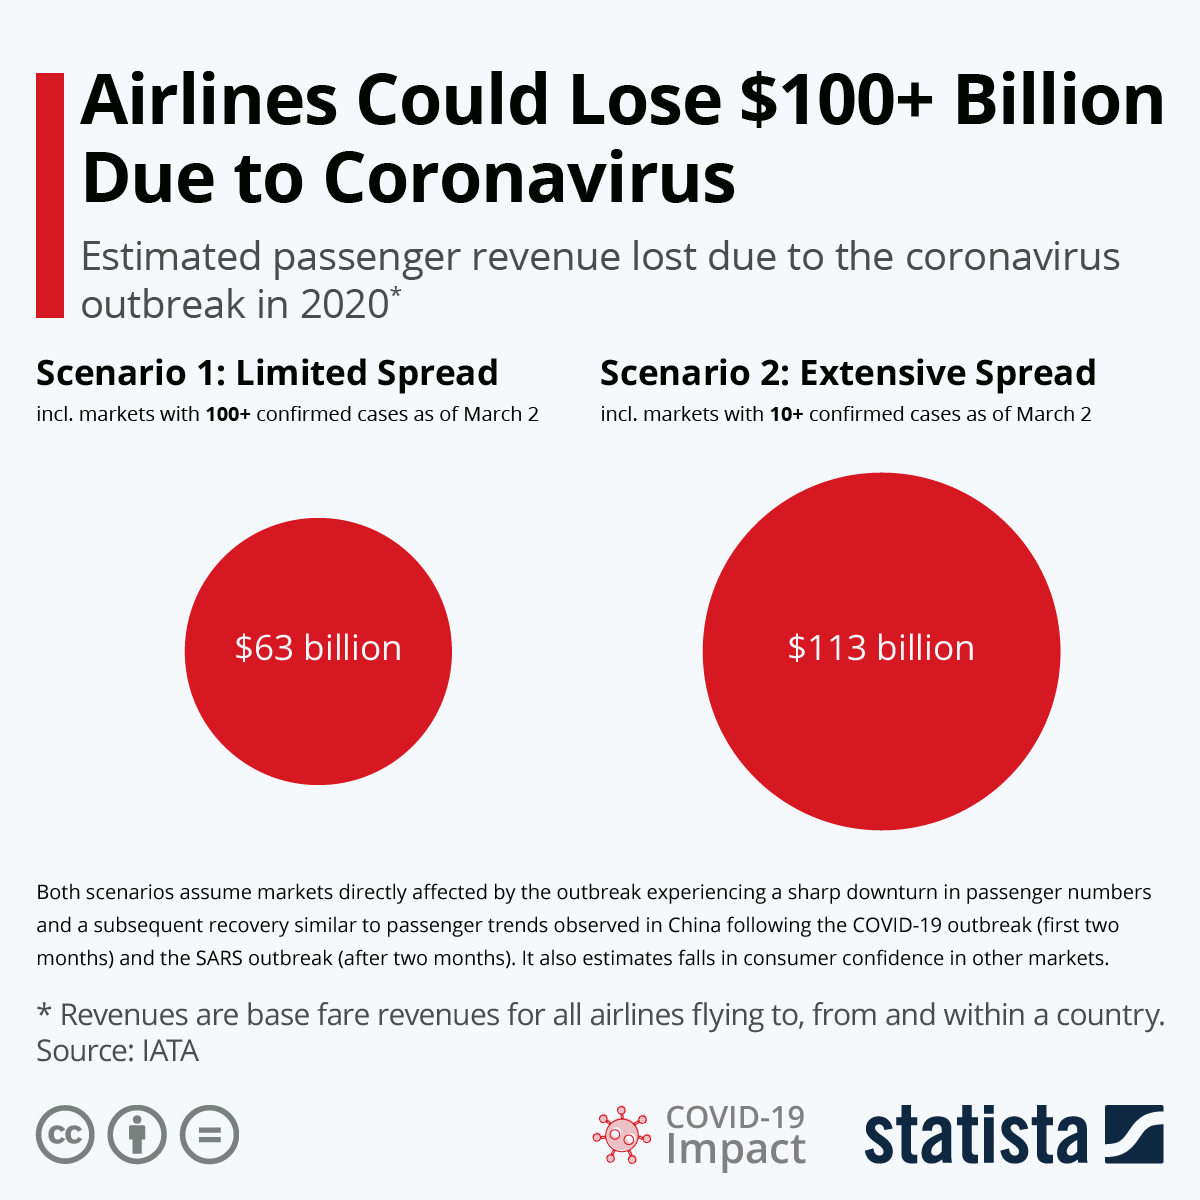 Coronavirus Fear: Airlines Face Severe Loss #Infographic